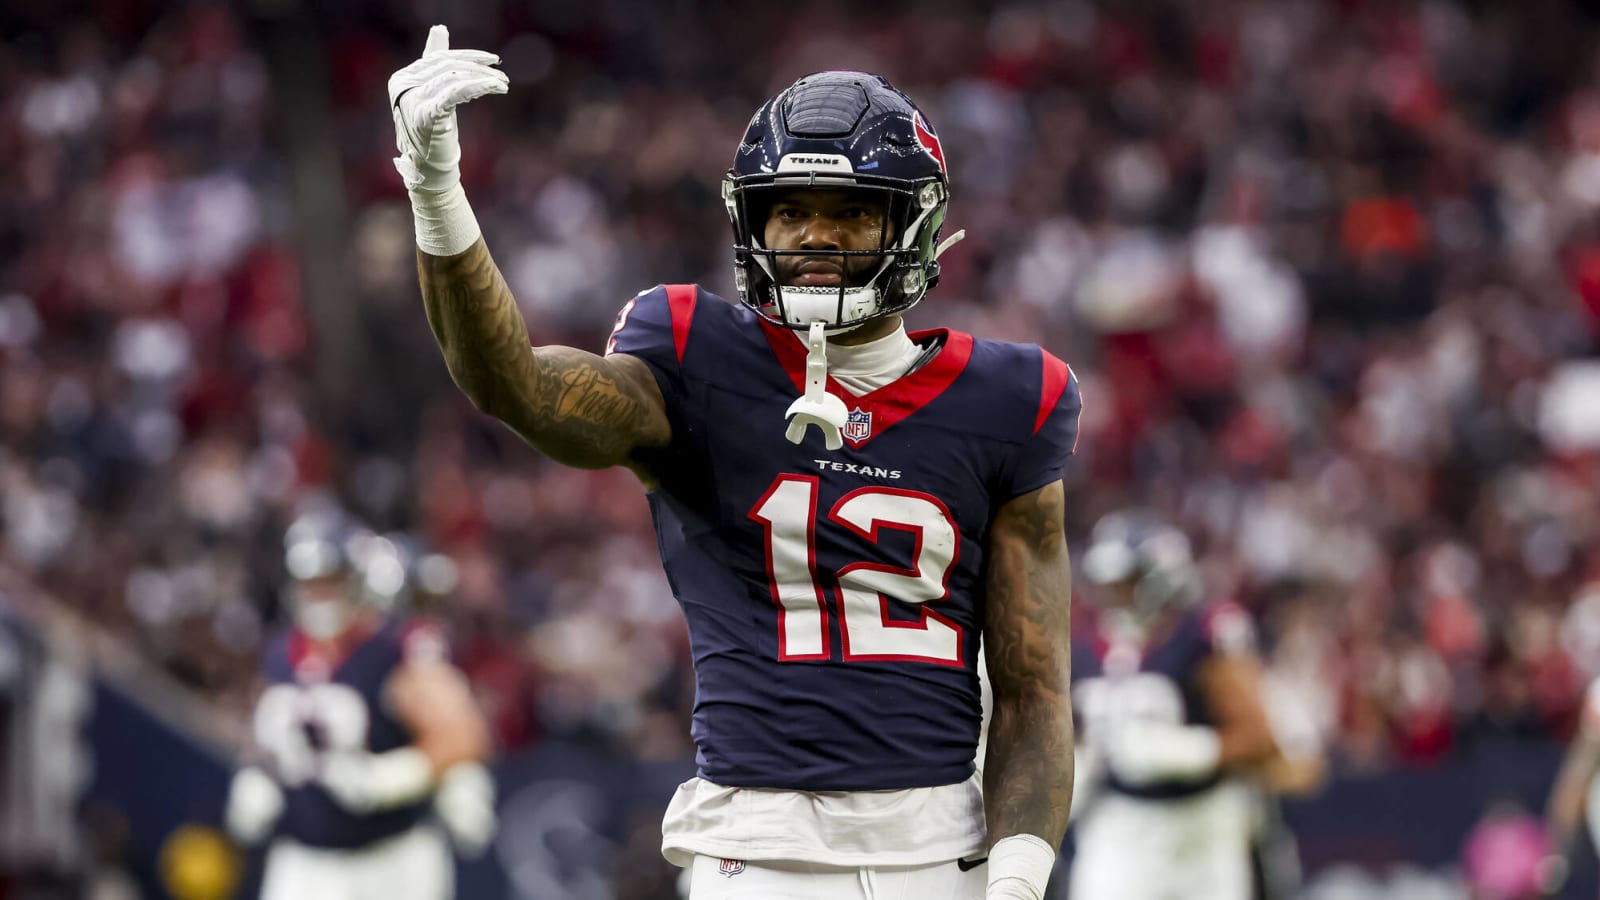 Star WR open to extension with Texans